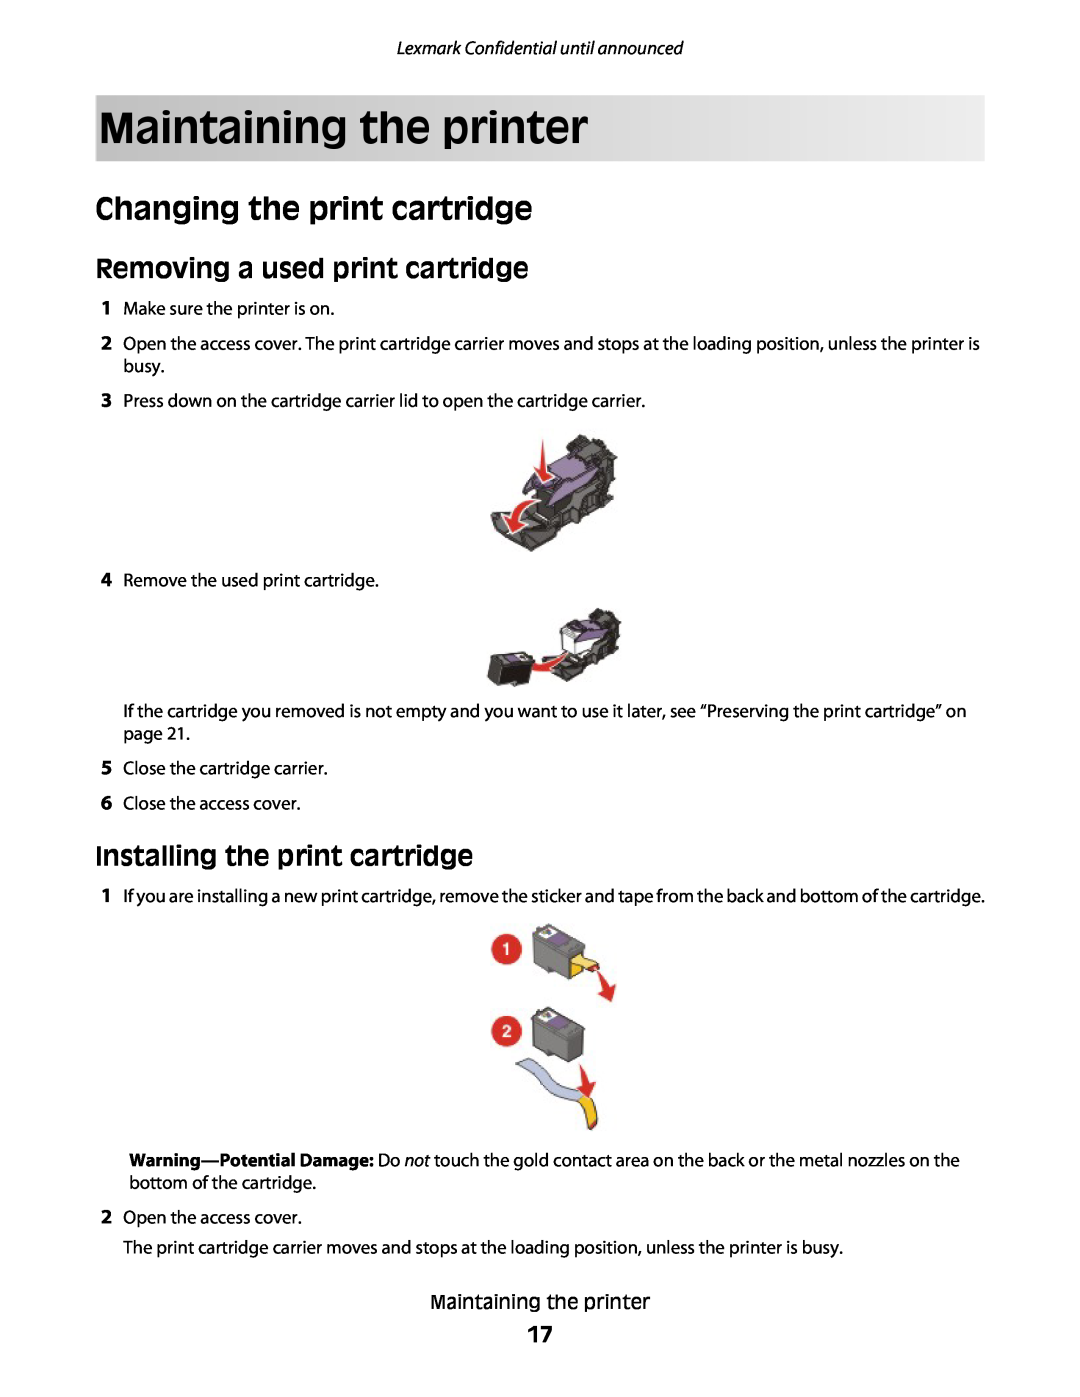 Lexmark P200 manual Maintaining the printer, Changing the print cartridge, Removing a used print cartridge 